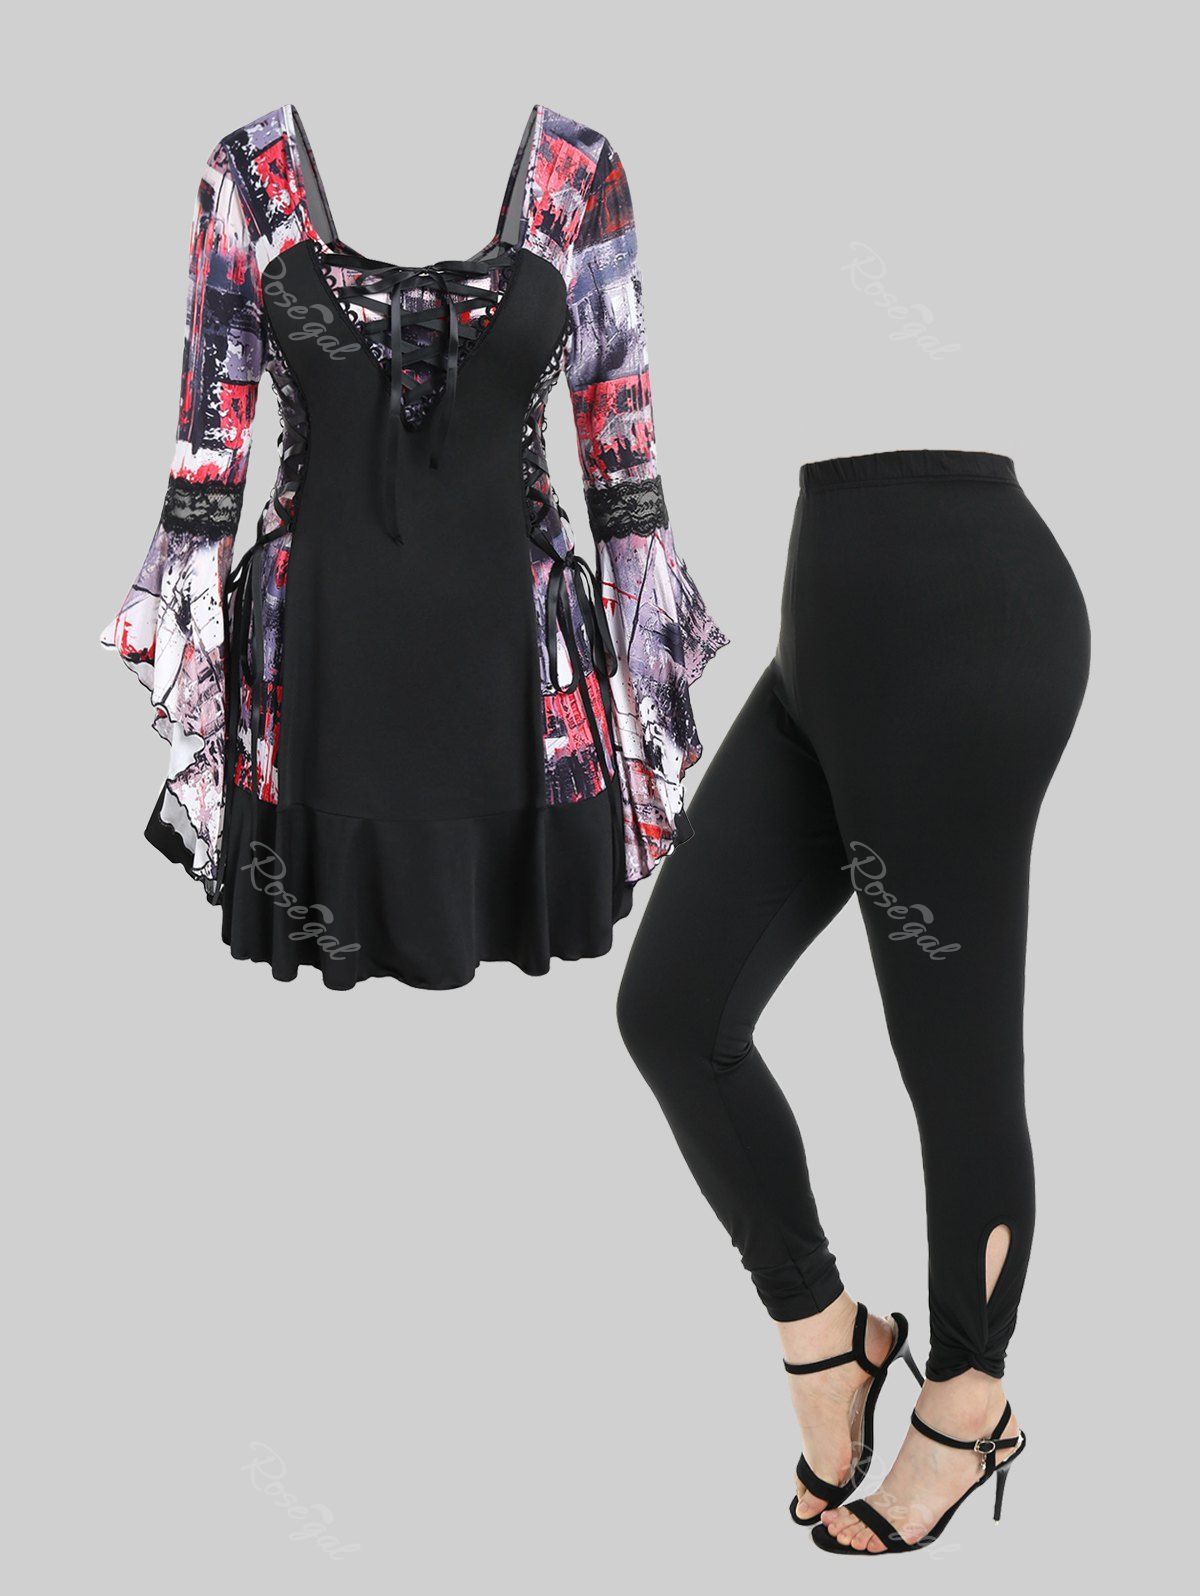 Chic Lace-up Abstract Print Picot-trim Flare Sleeve Tee and Cutout Twist Leggings Plus Size Outfit  